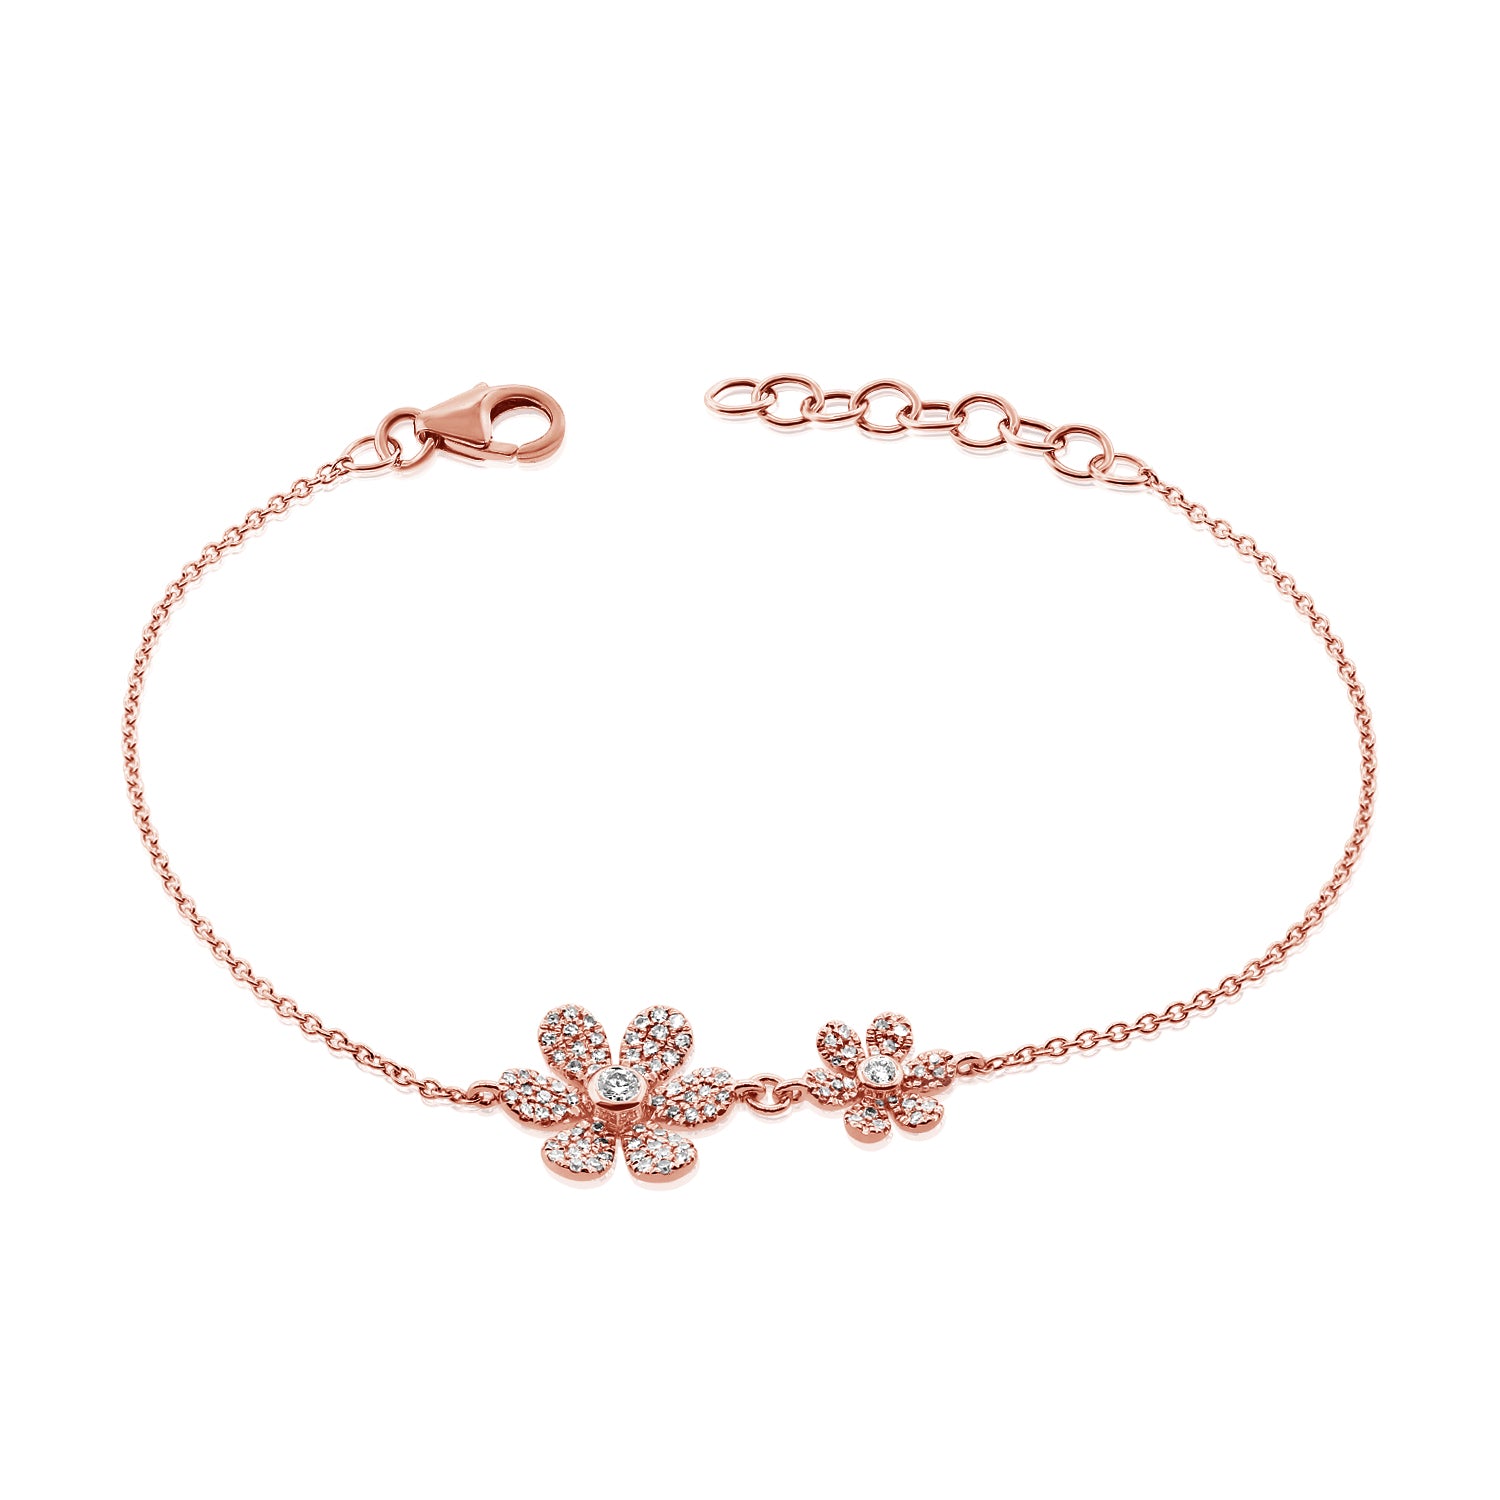 Diamond Double Daisy Bracelet - 14K rose gold weighing 2.50 grams - 2 round diamonds totaling 0.06 carats - 84 round diamonds totaling 0.28 carats